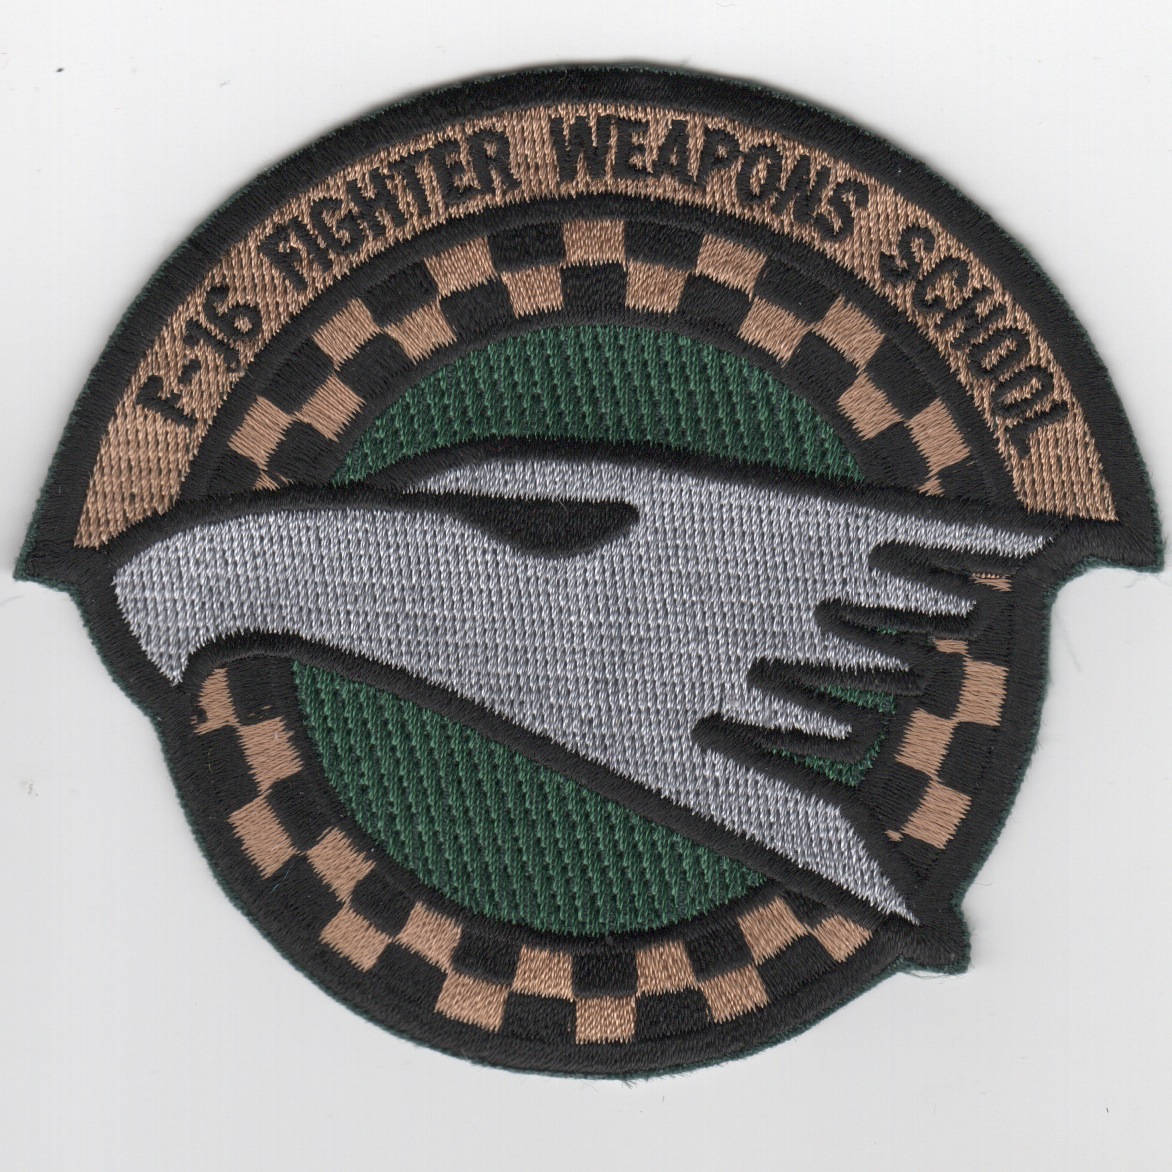 USAF FWIC F-16 Division Patch (Green)